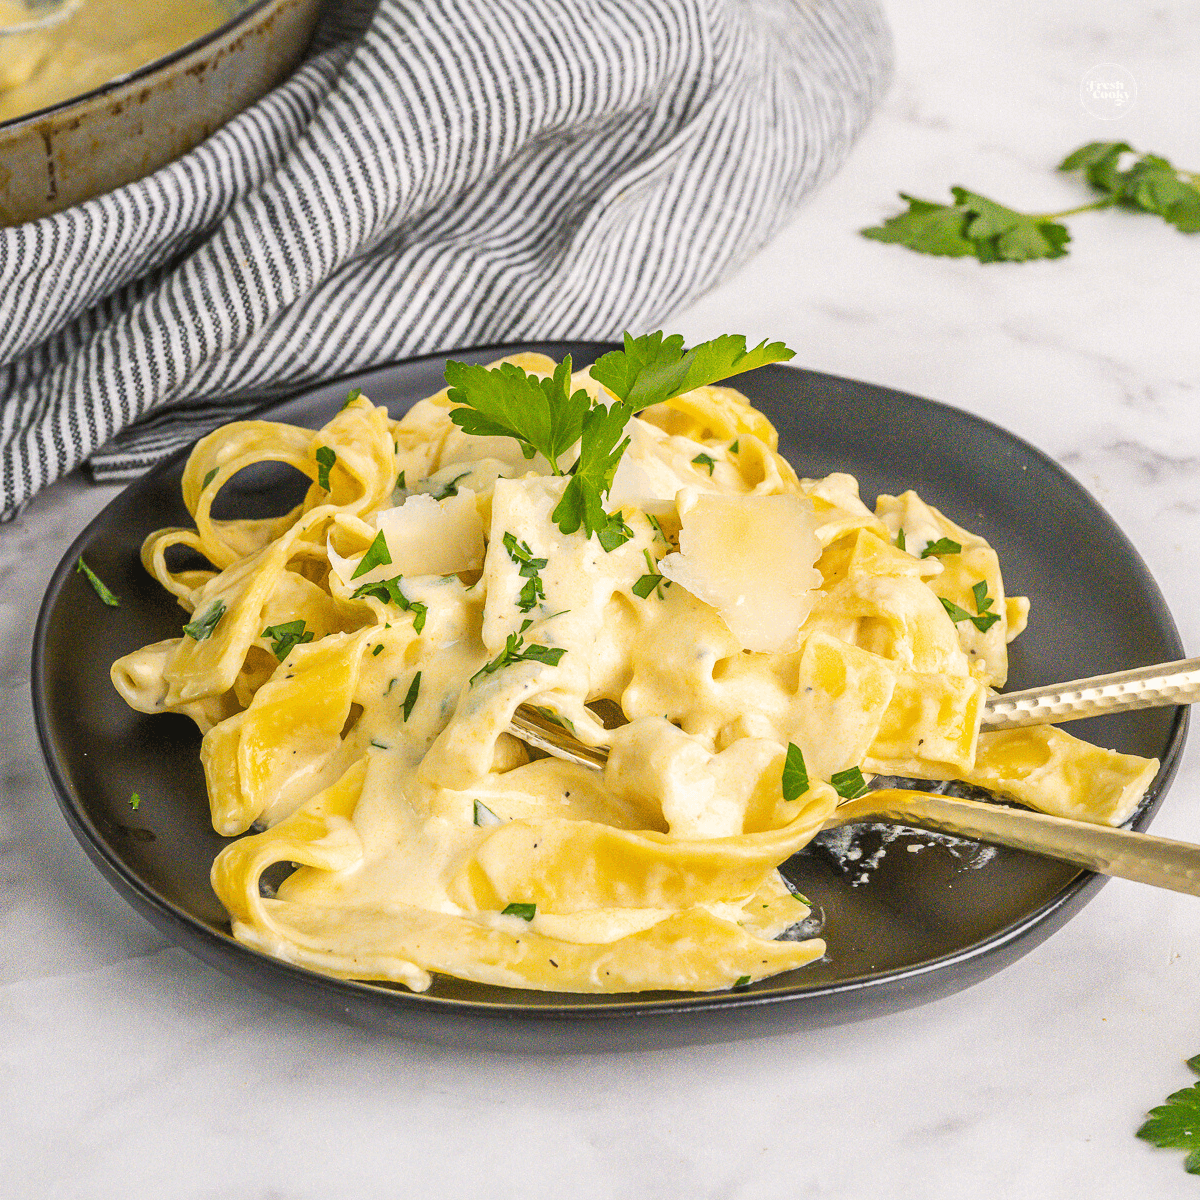 Homemade Alfredo sauce recipe without cream cheese spooned onto fettuccine on black plate.